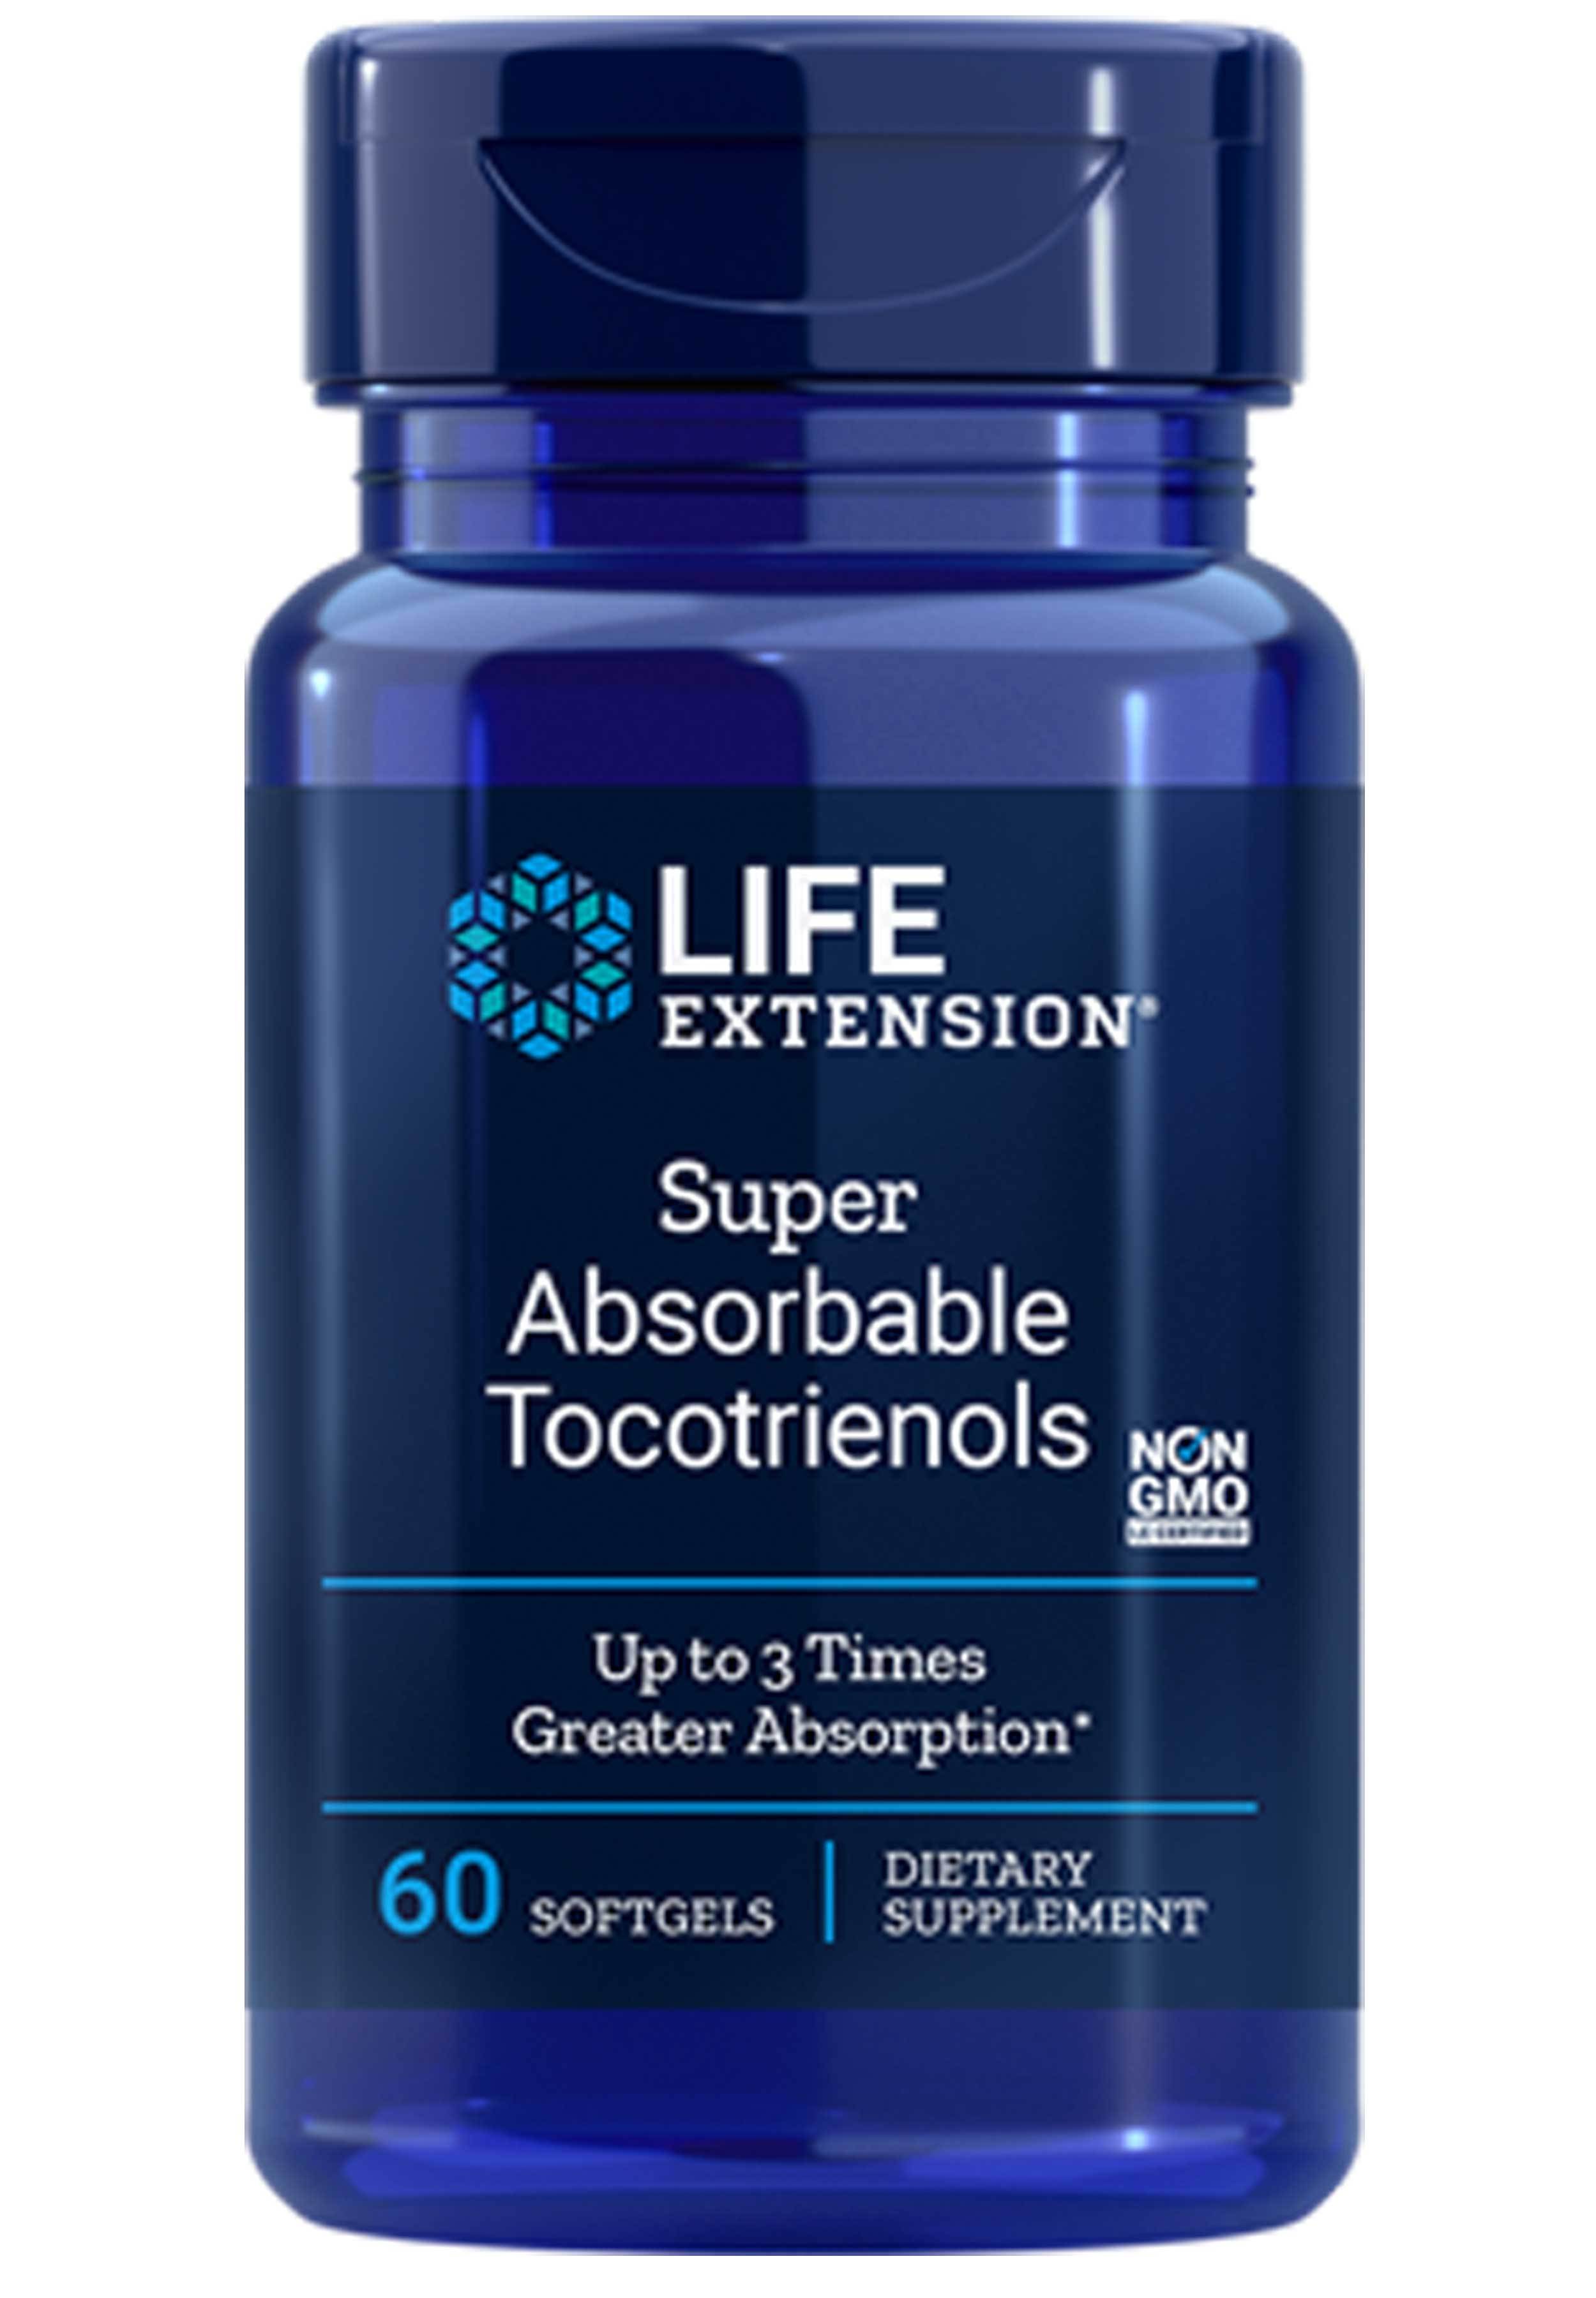 Life Extension Super Absorbable Tocotrienols